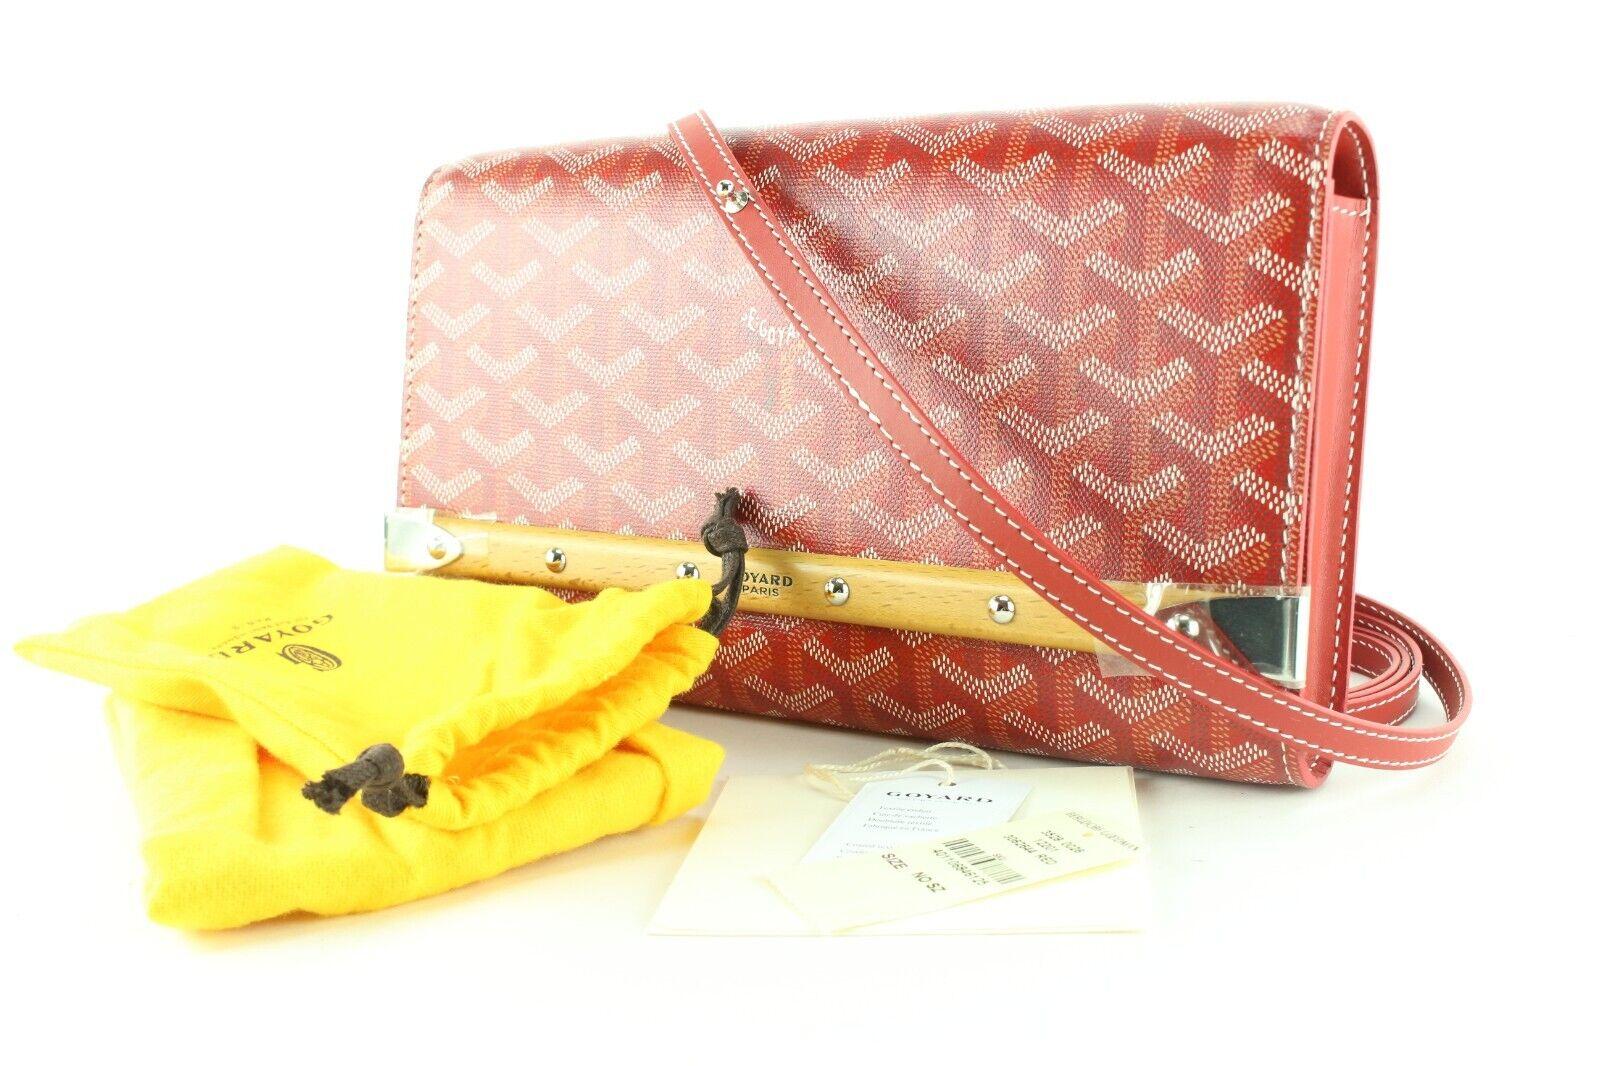 Goyard Red Chevron Monte Carlo Bois Crossbody Flap 1GY0301
Date Code/Serial Number: ATS020194

Made In: France

Measurements: Length: 9.75 